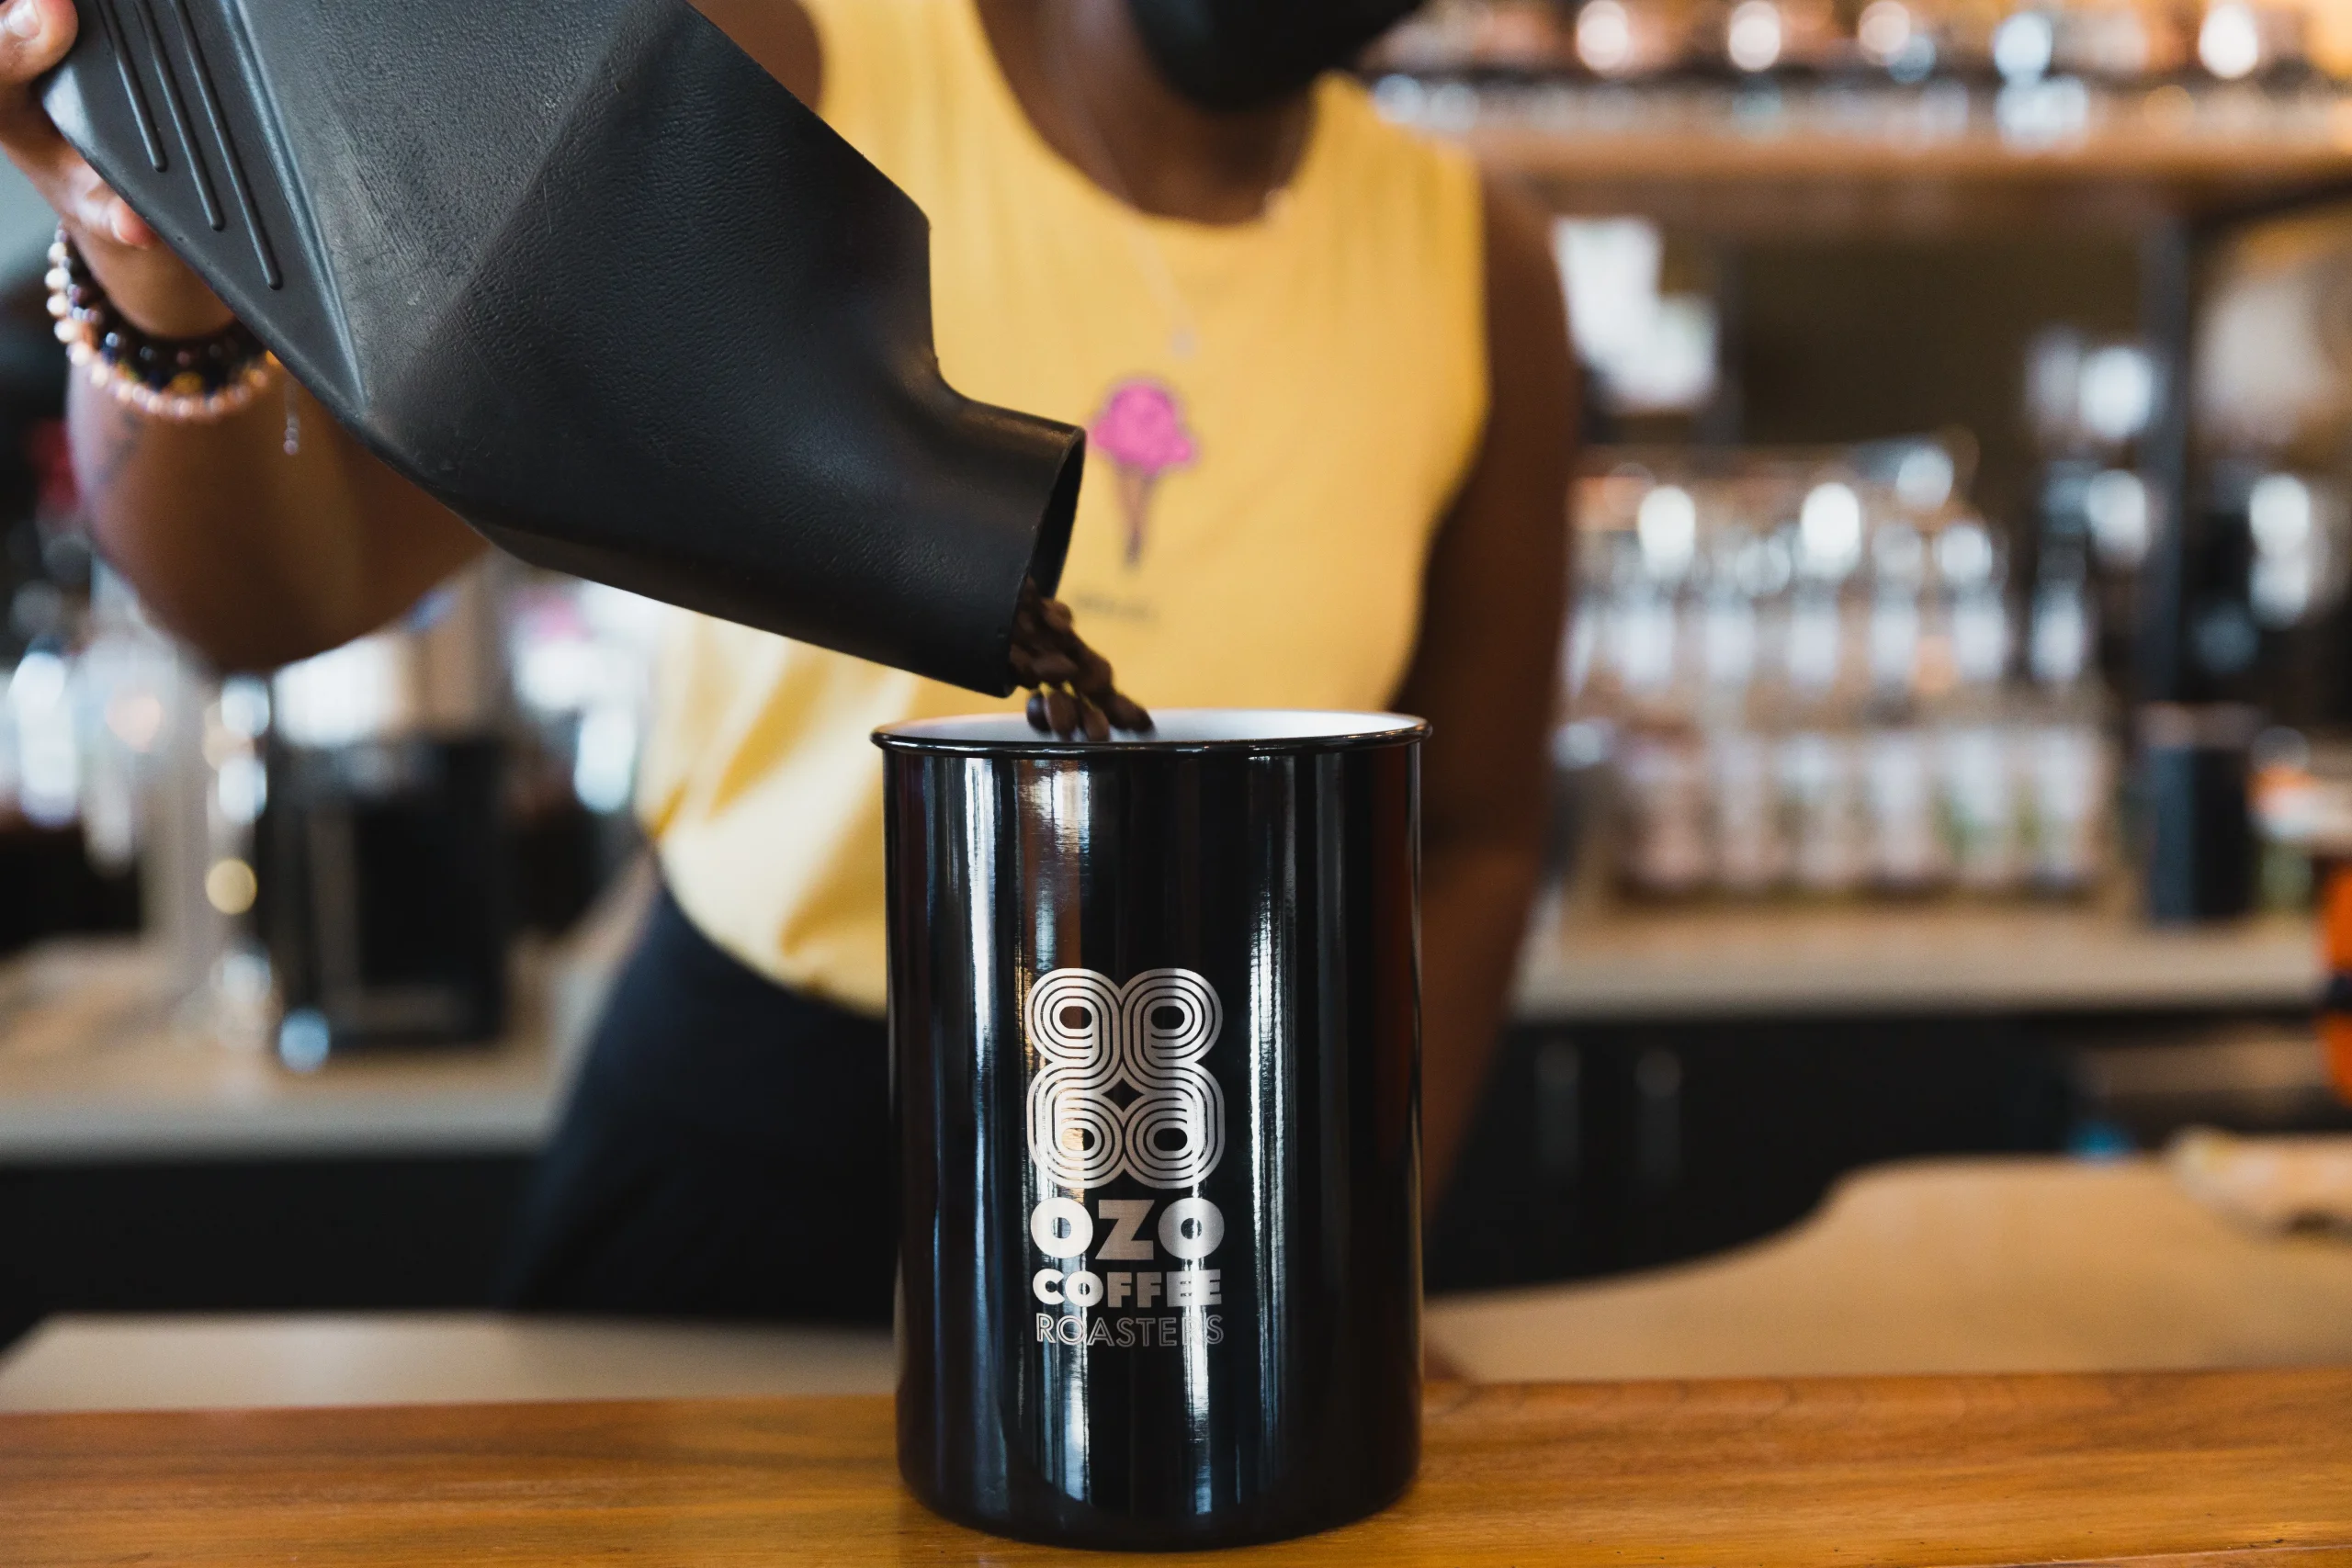 Barista carefully pouring coffee beans into Custom OZO Coffee Airscape Canister